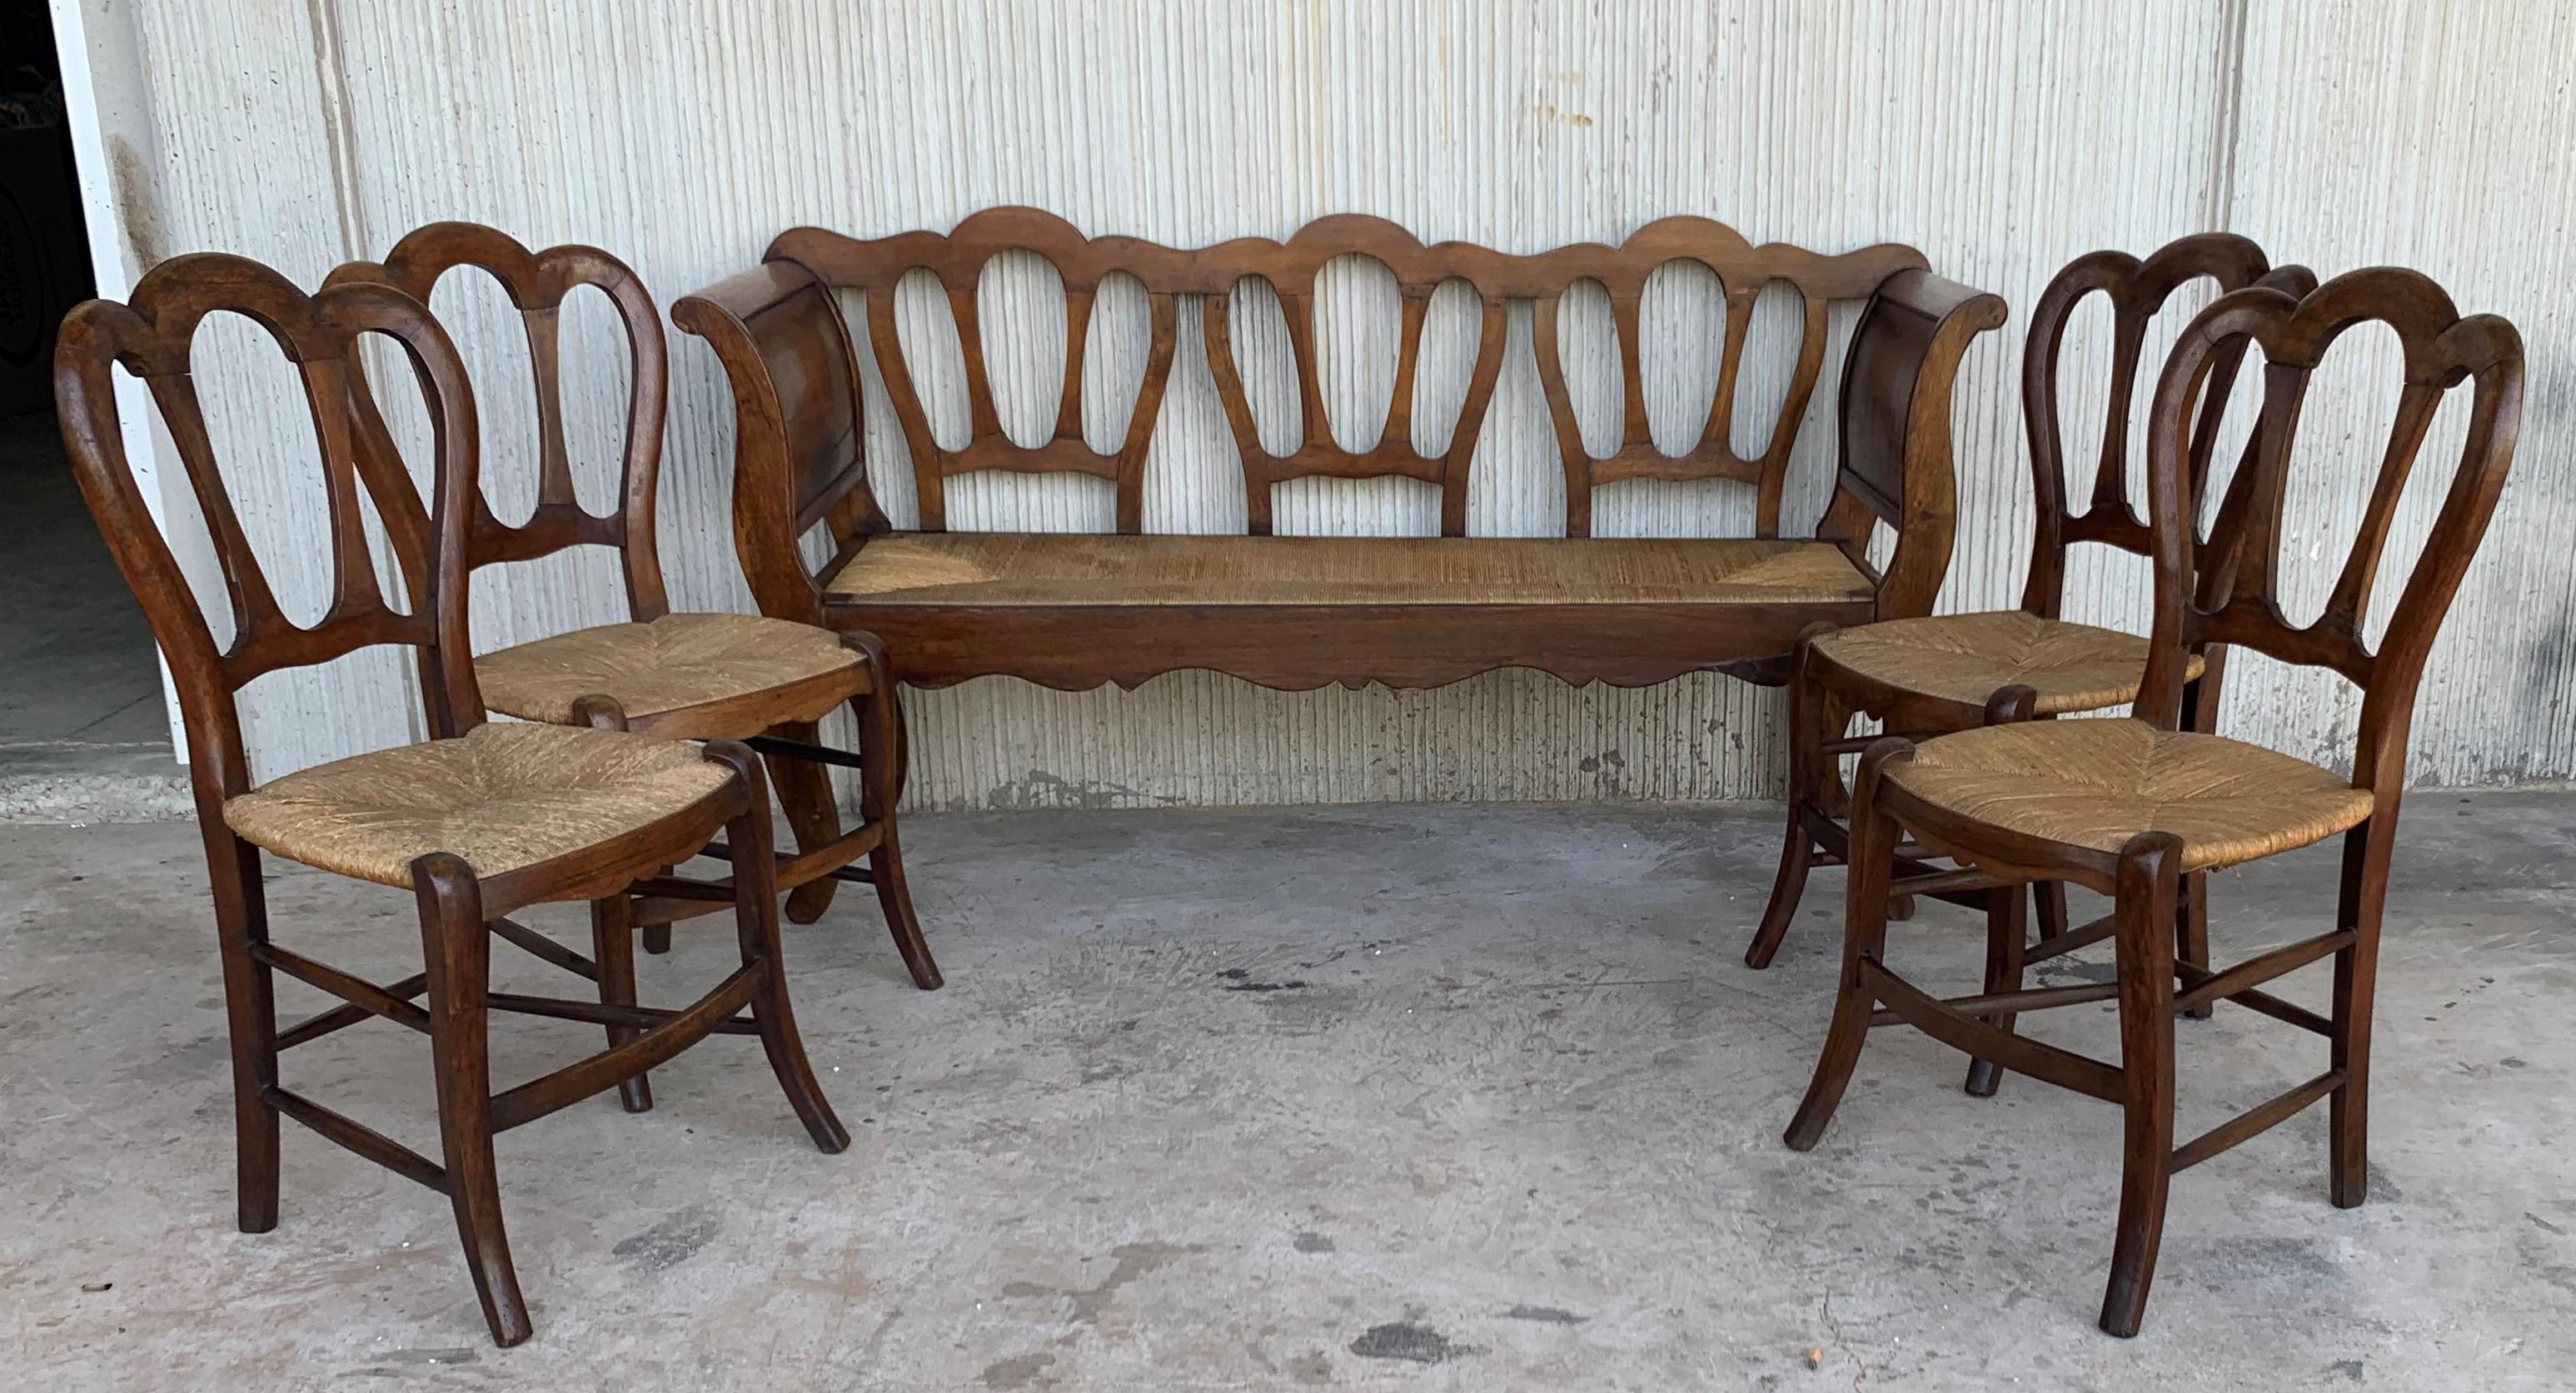 20th Set of One Bench and Four Victorian Chairs, Wood and Rattan In Good Condition For Sale In Miami, FL